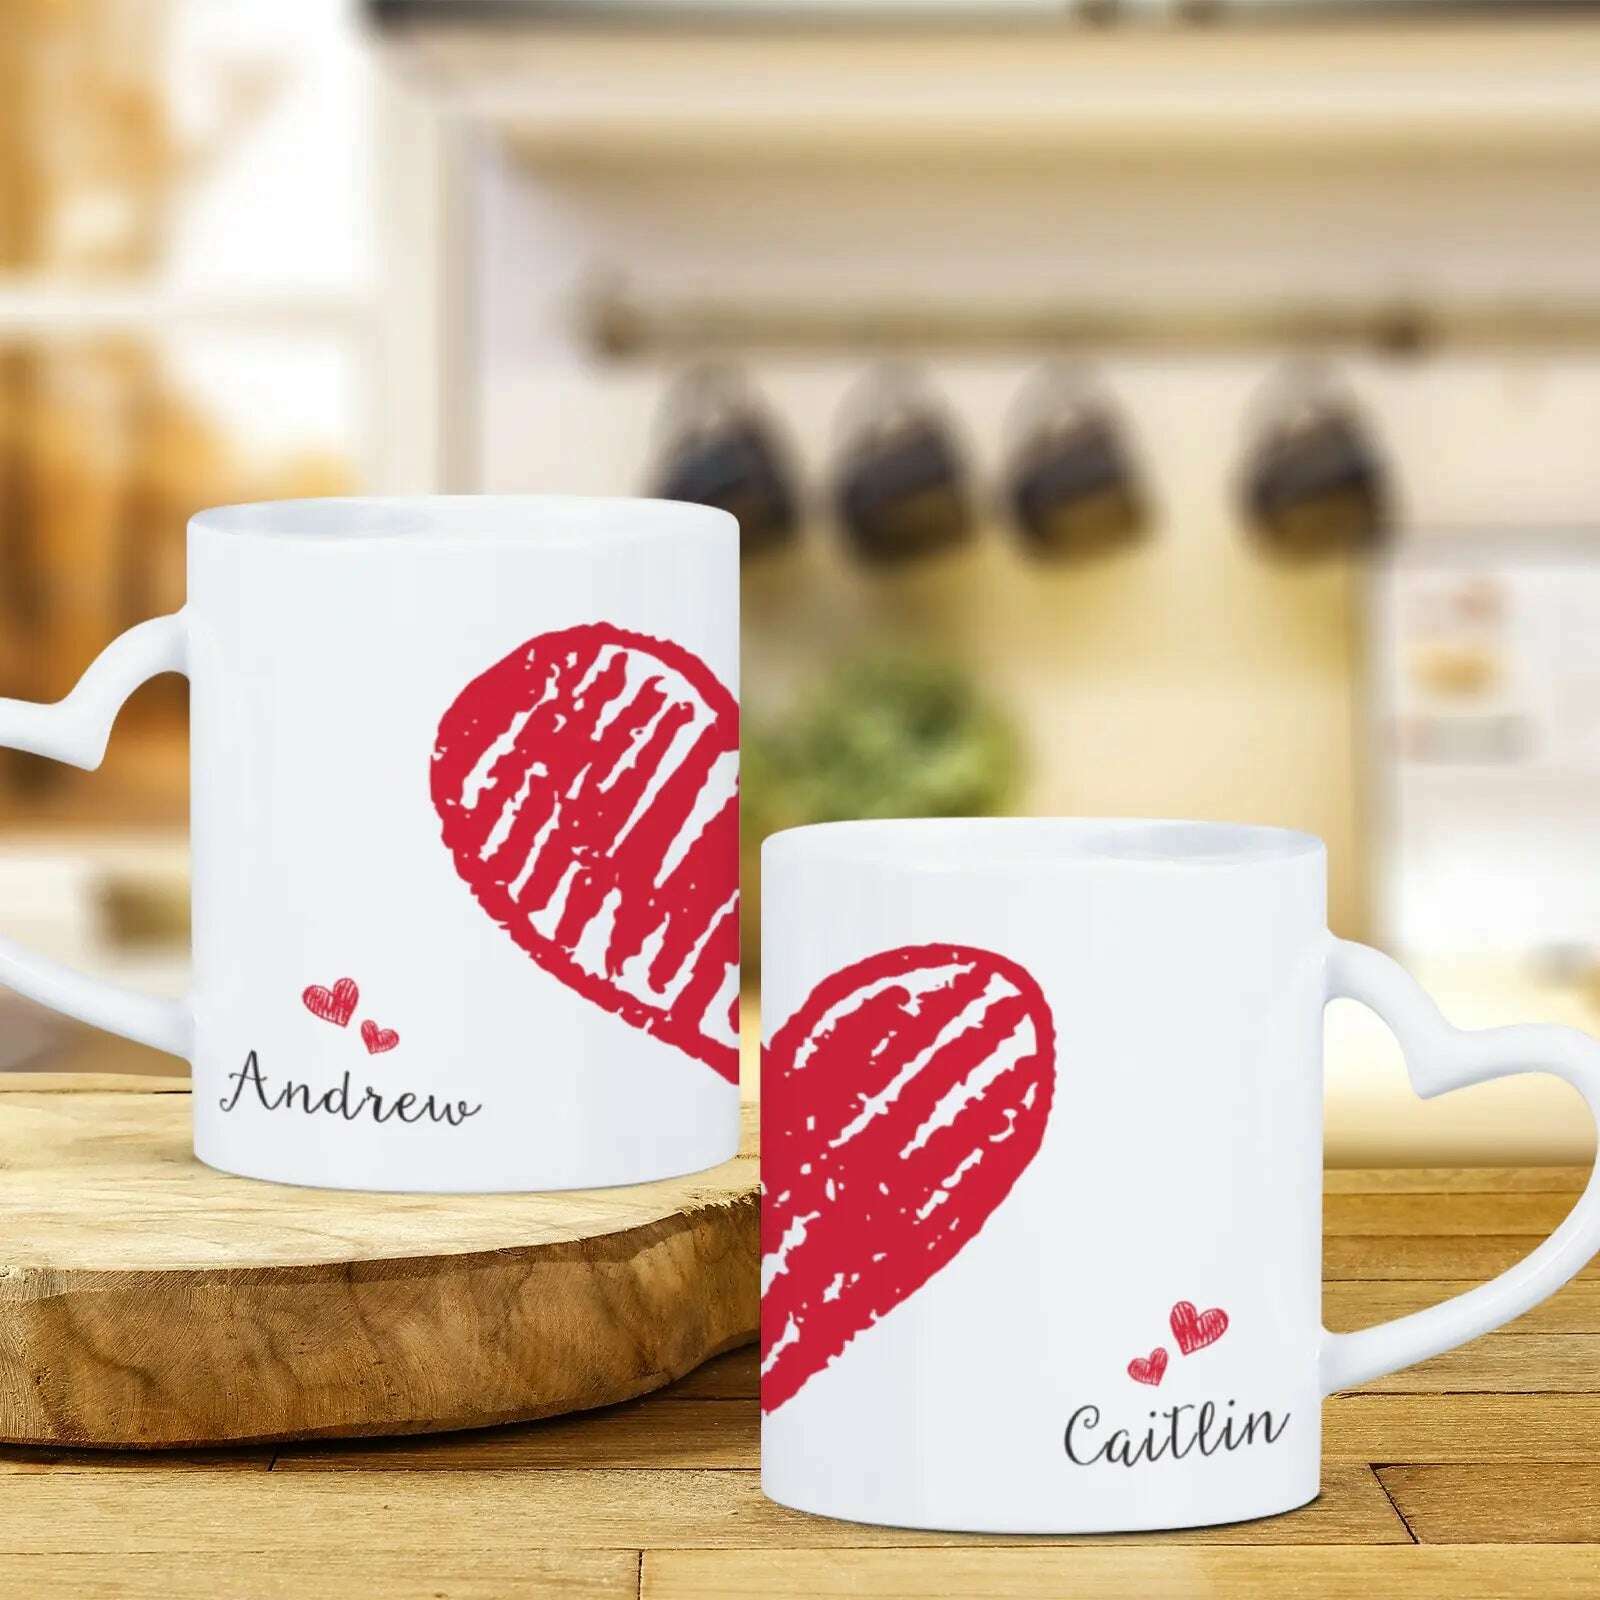 2pc Heart Handle Personalized Name Couple Coffee Mug for Girlfriend Wife Husband Valentine's Day present for Couples Coffee Mugs, KIMLUD Women's Clothes